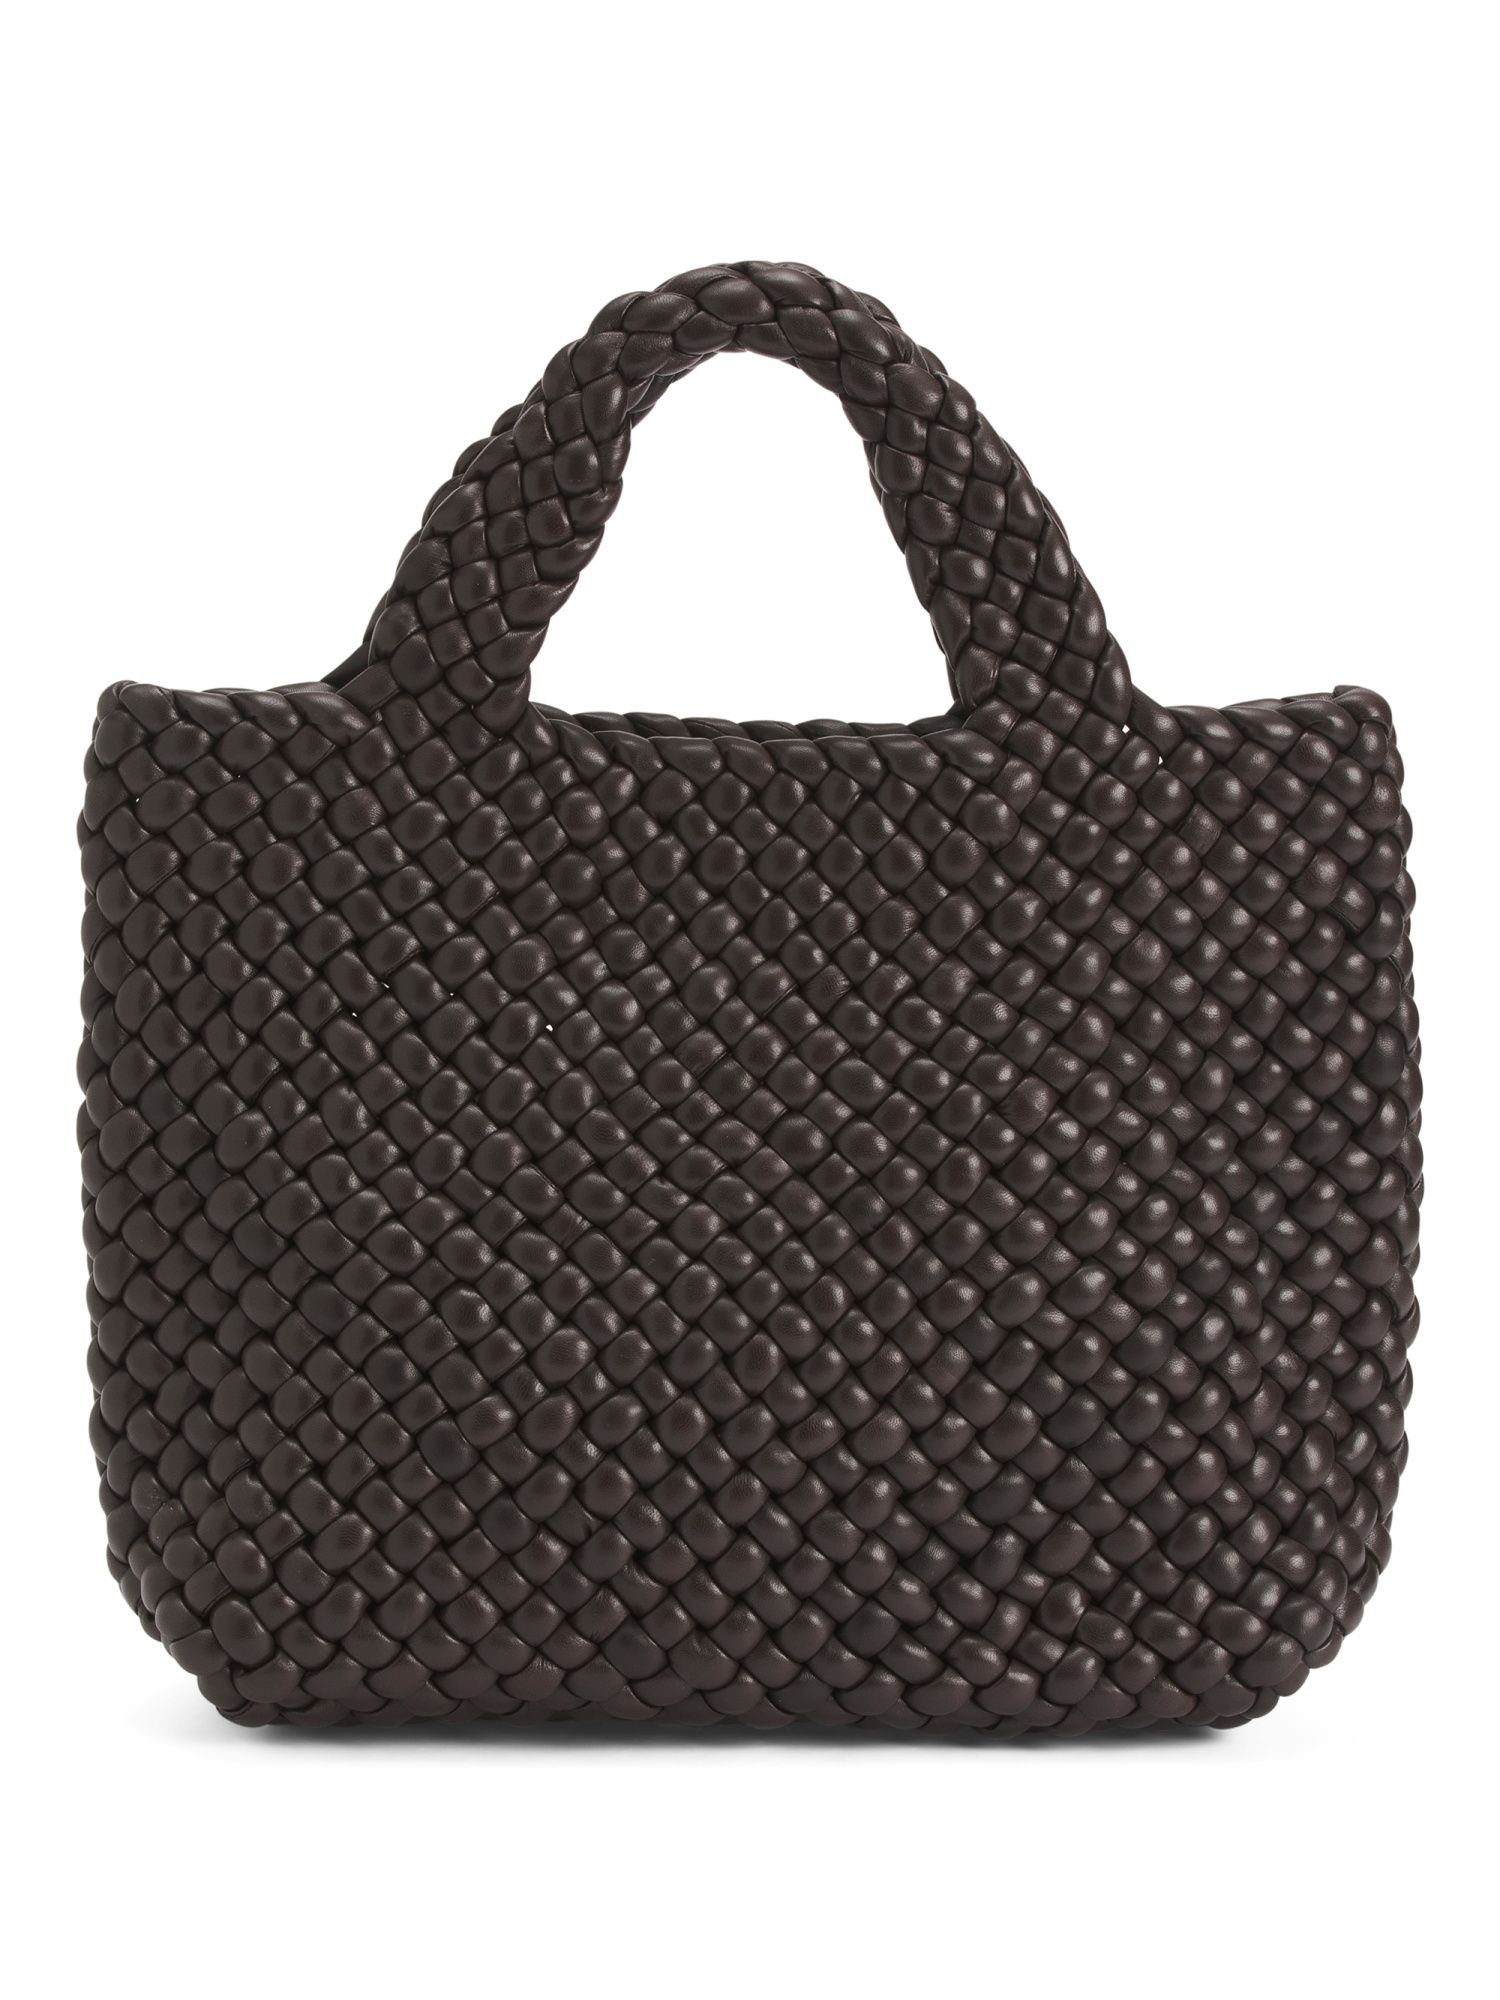 Made In Italy Leather Chunky Woven Tote With Pouch | TJ Maxx